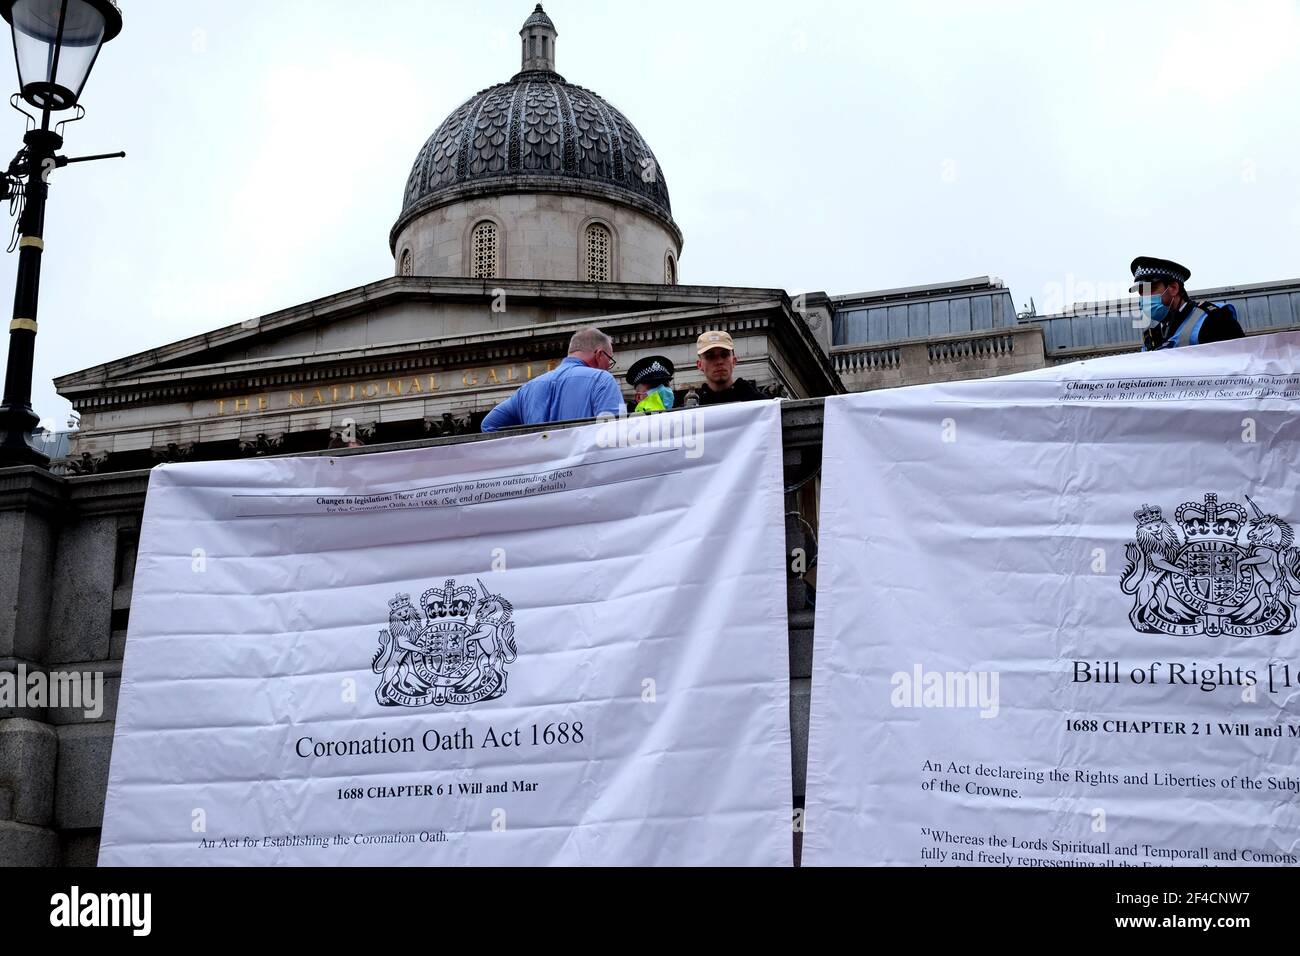 London, UK. 20th Mar 2021. protest march through central london. part of worldwide fally for freedom. antilockdown protest. #wewillALLbethere Credit: david mccairley/Alamy Live News Stock Photo